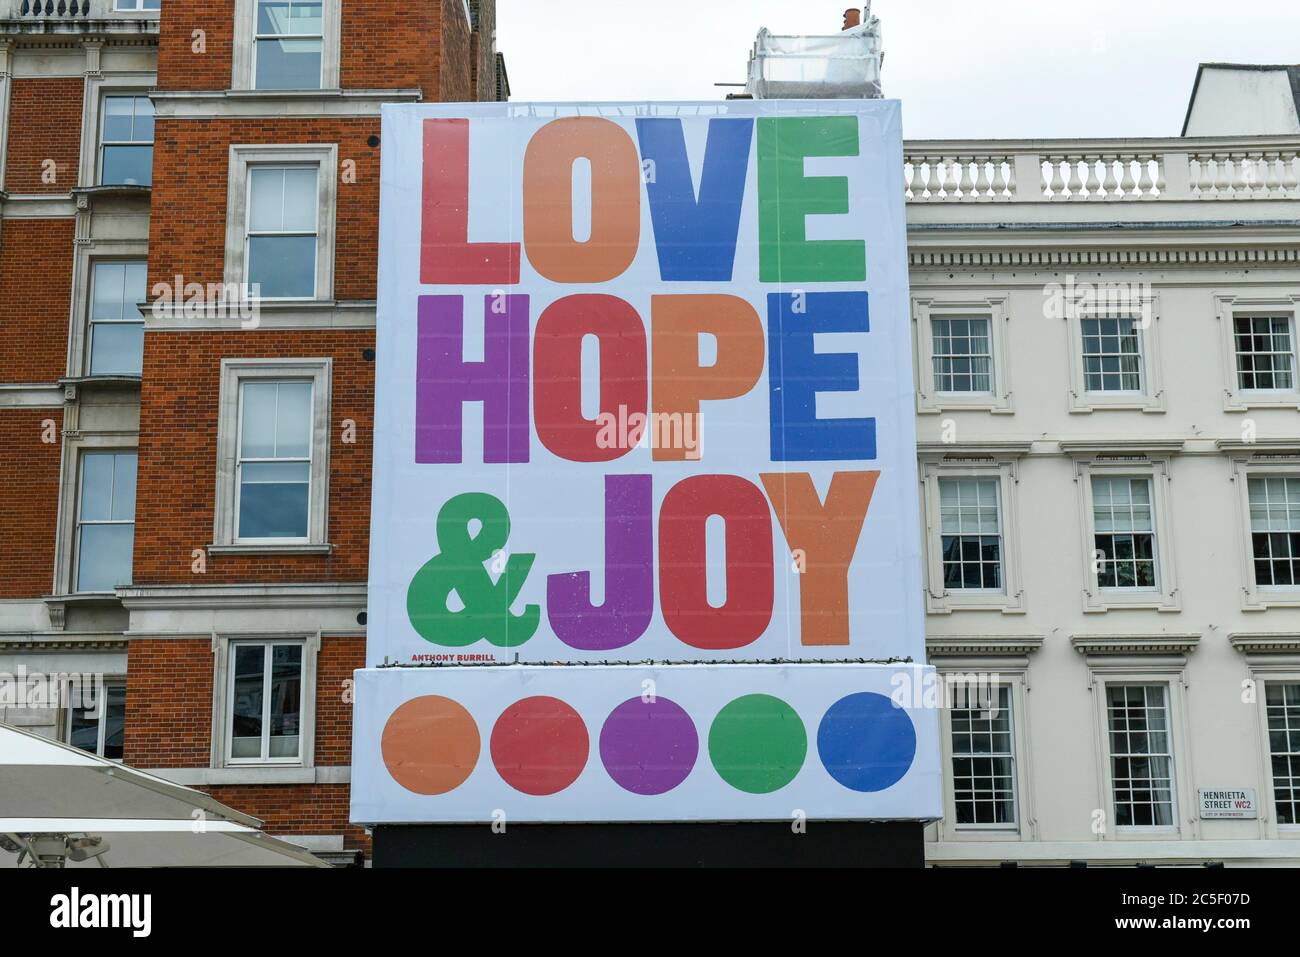 London, UK.  2 July 2020.  A poster displaying the text 'Love, Hope and Joy' overlooks The Piazza in Covent Garden.  The artwork by Anthony Burrill is his largest to date and celebrates the re-opening of the area to shoppers and businesses after certain coronavirus pandemic lockdown restrictions have been relaxed.  The work will be on show until October 2020.   Credit: Stephen Chung / Alamy Live News Stock Photo